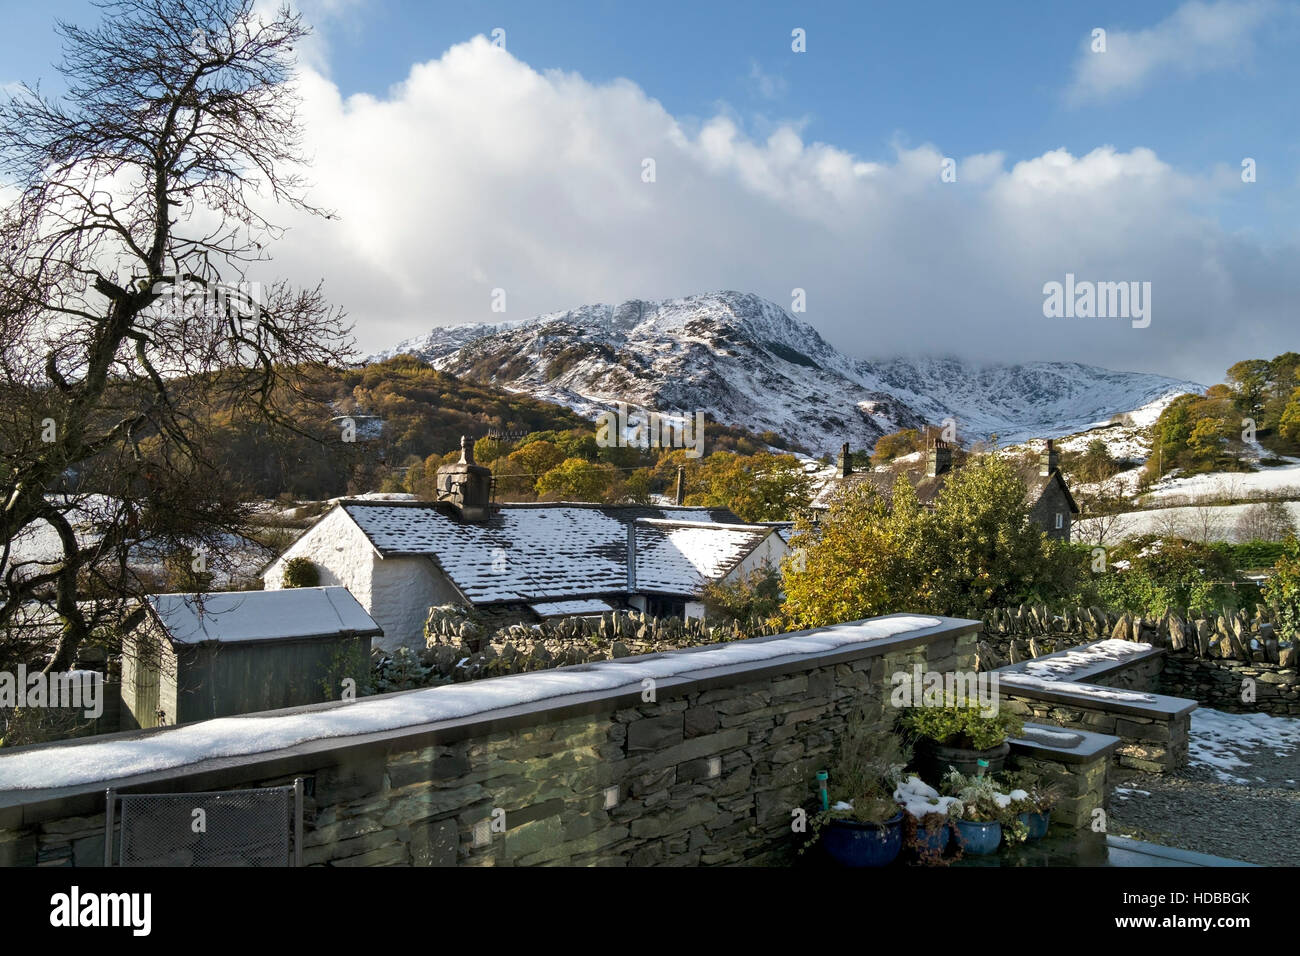 Little Langdale cottages and Wetherlam Fell in snow, English Lake District, Cumbria, England, UK. Stock Photo